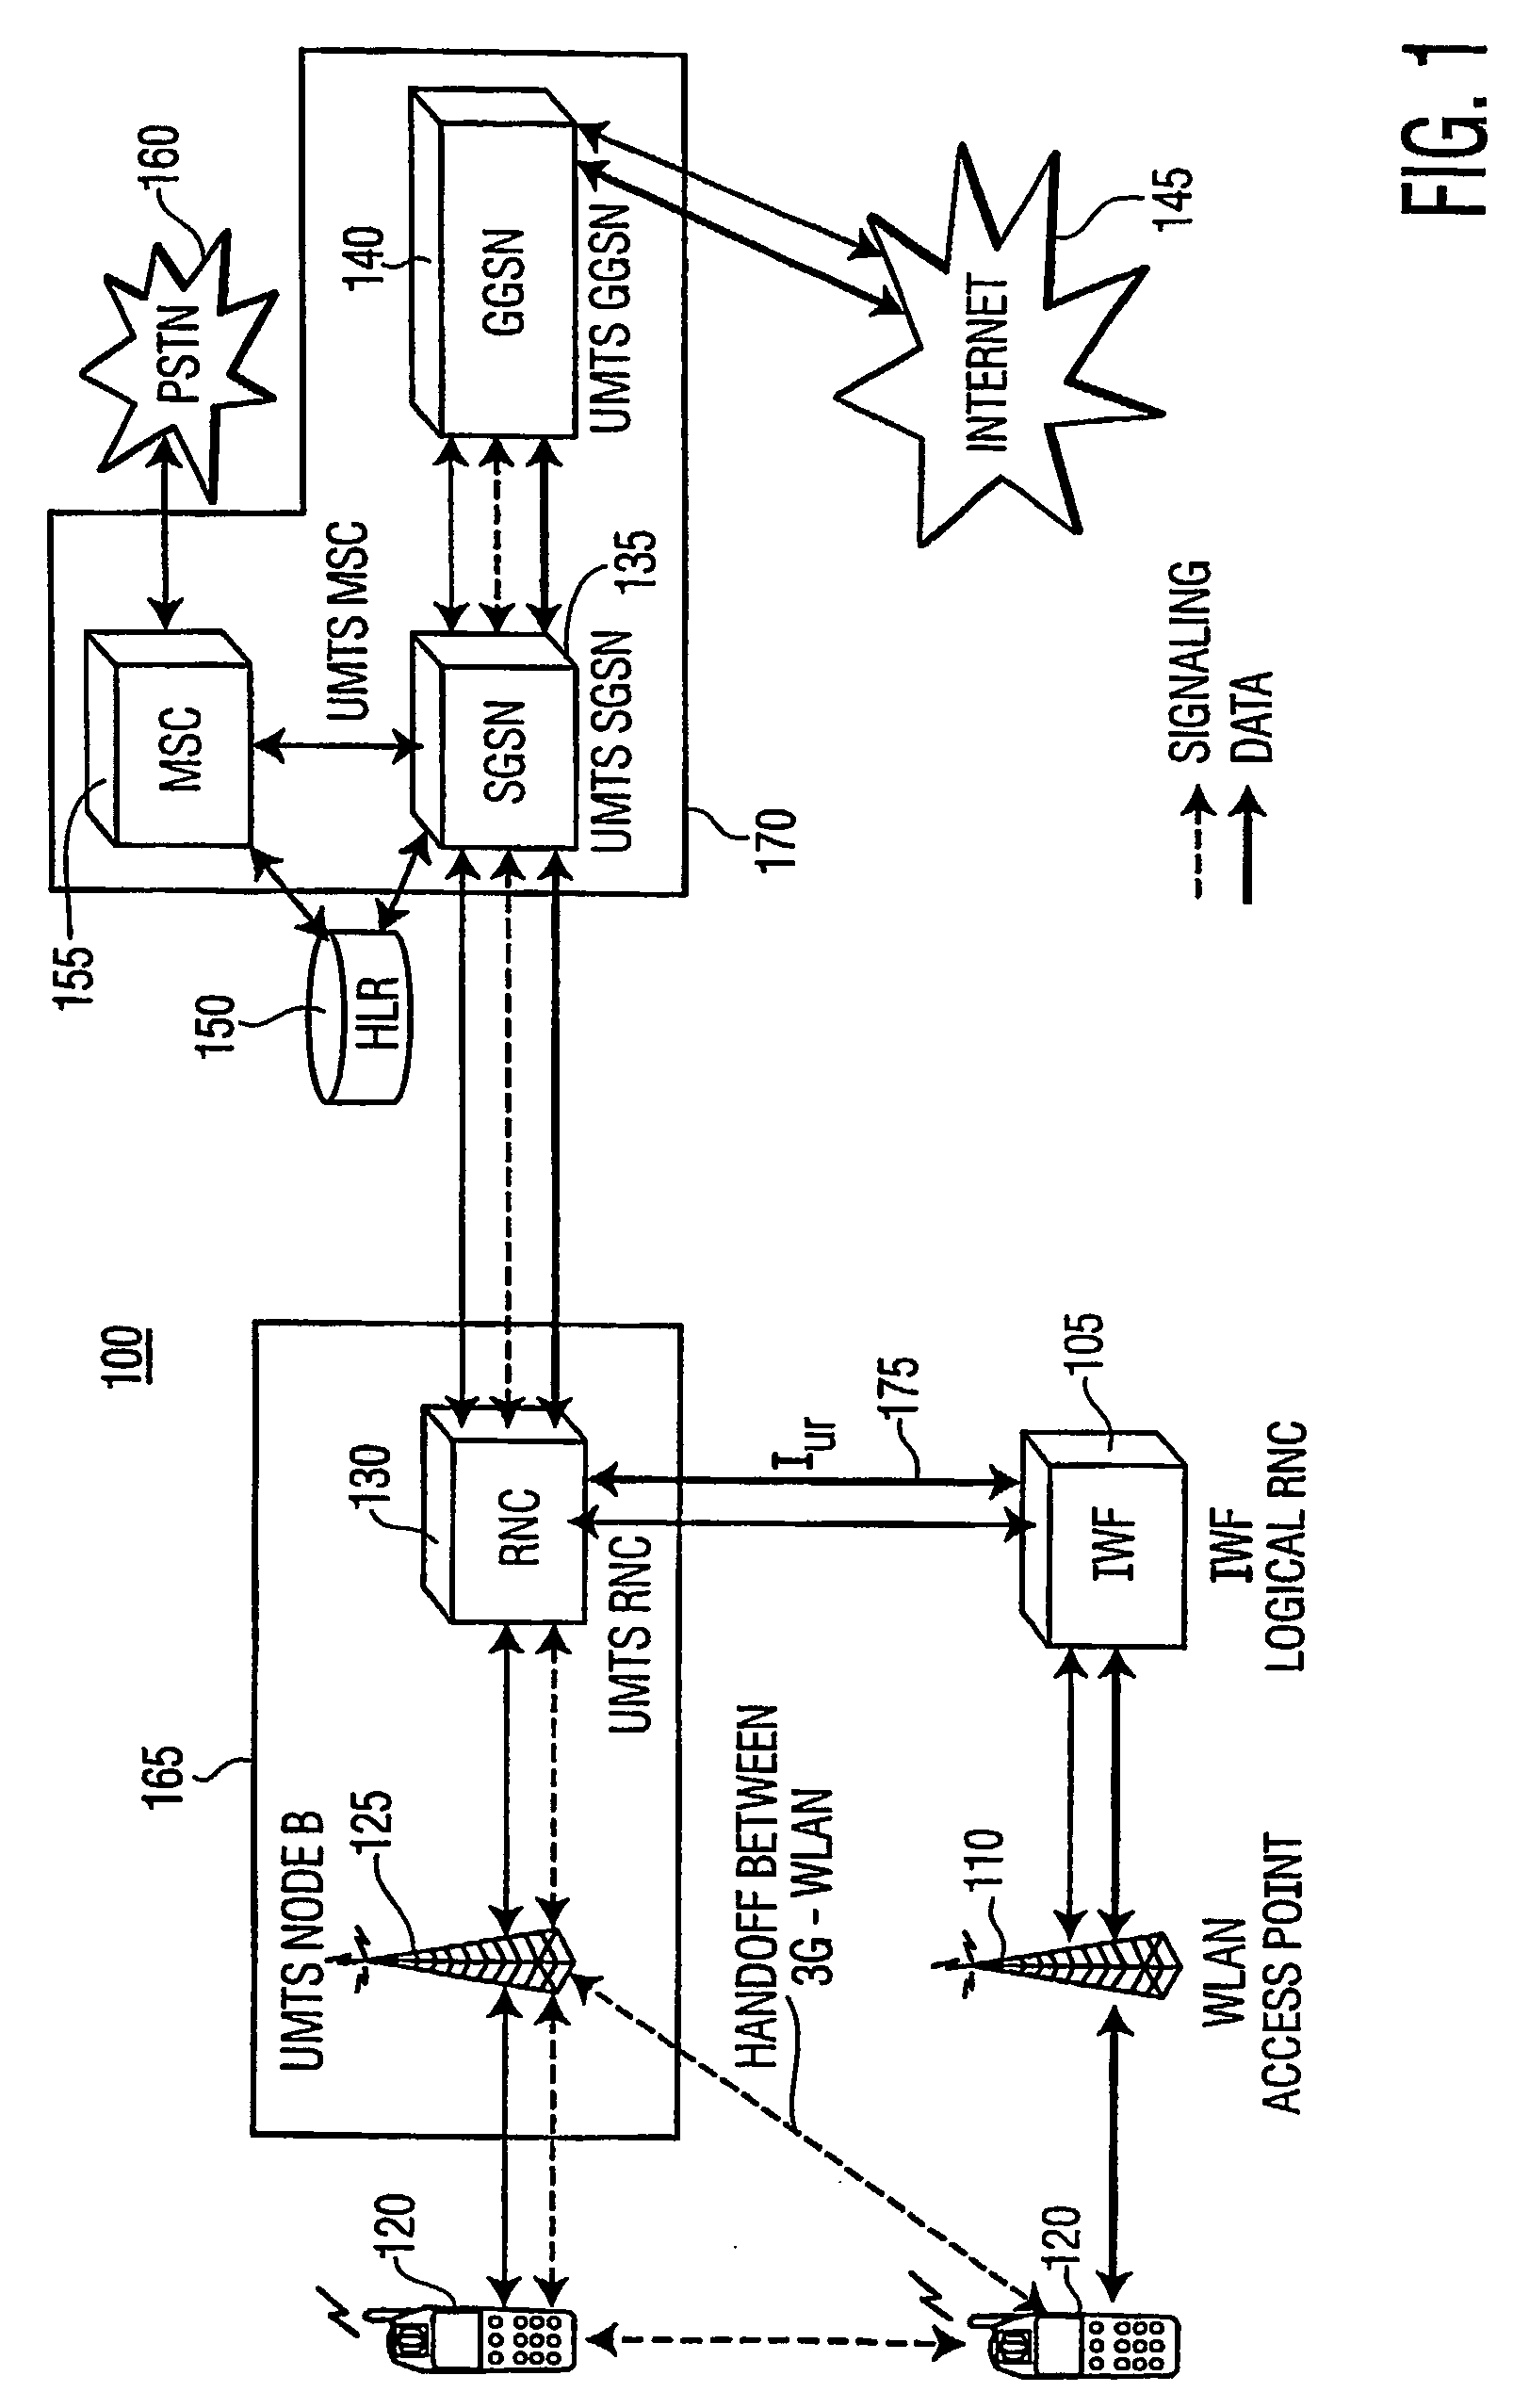 Inter working function (iwf) as logical radio network controller (rnc) for hybrid coupling in an interworking between wlan and a mobile communications network